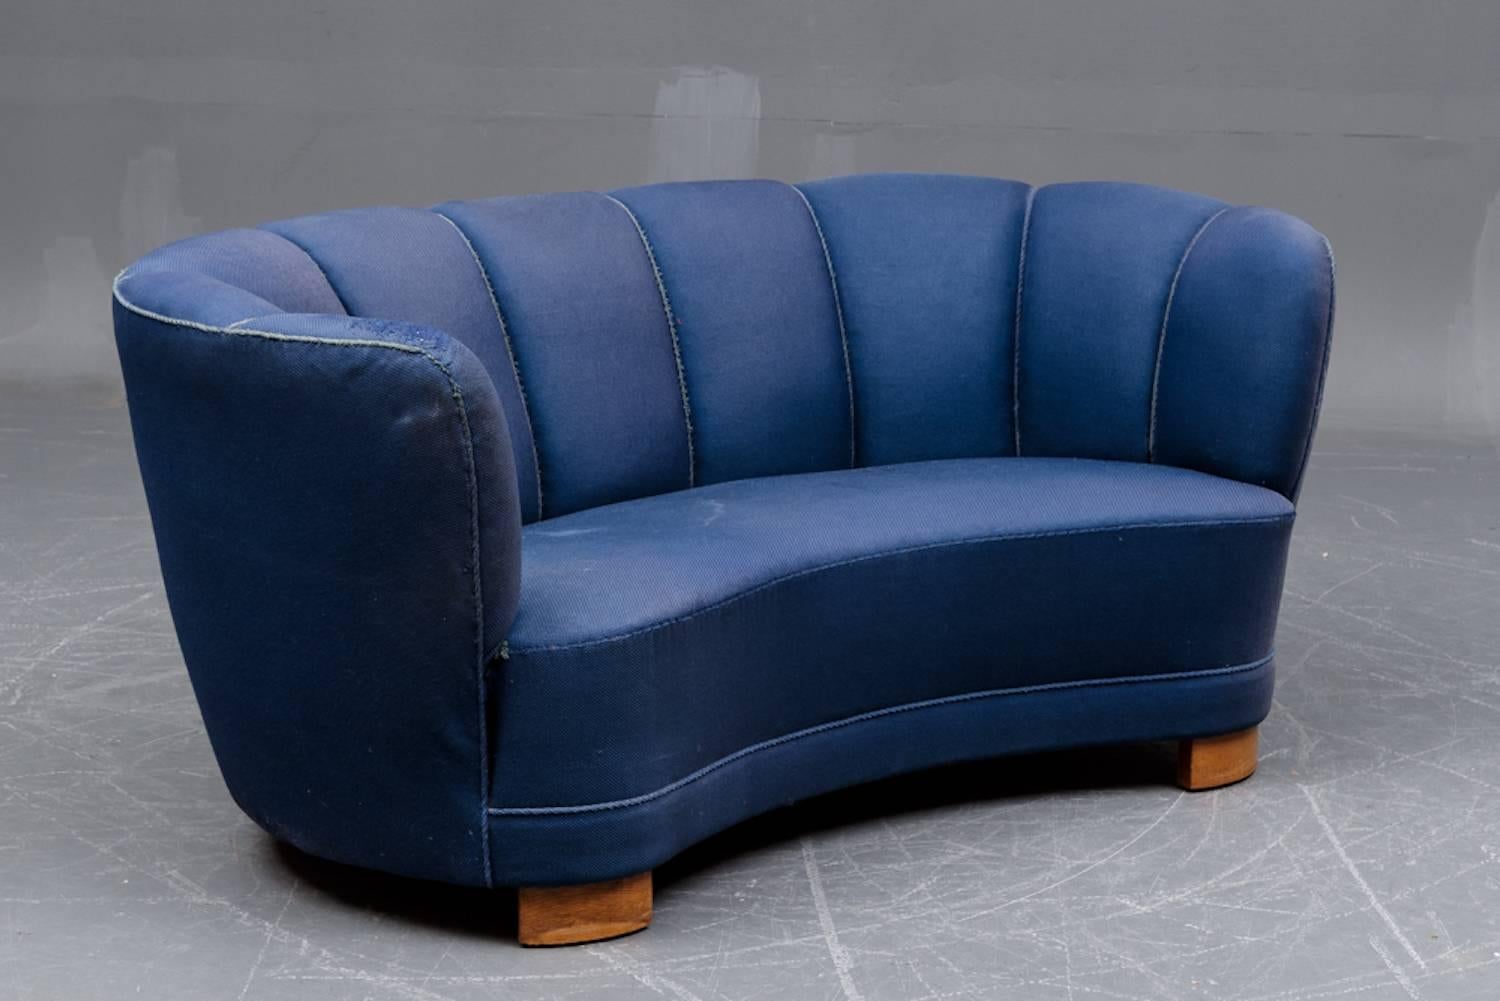 Blue covered banana form sofa from Denmark, Mid-Century Modern on beech 
legs. Needs recovering fabric worn and has a small hole plus a darned hole. 
Popular form, from Slegelsee Fabrik, we have several others in different colors, 
green, gold,